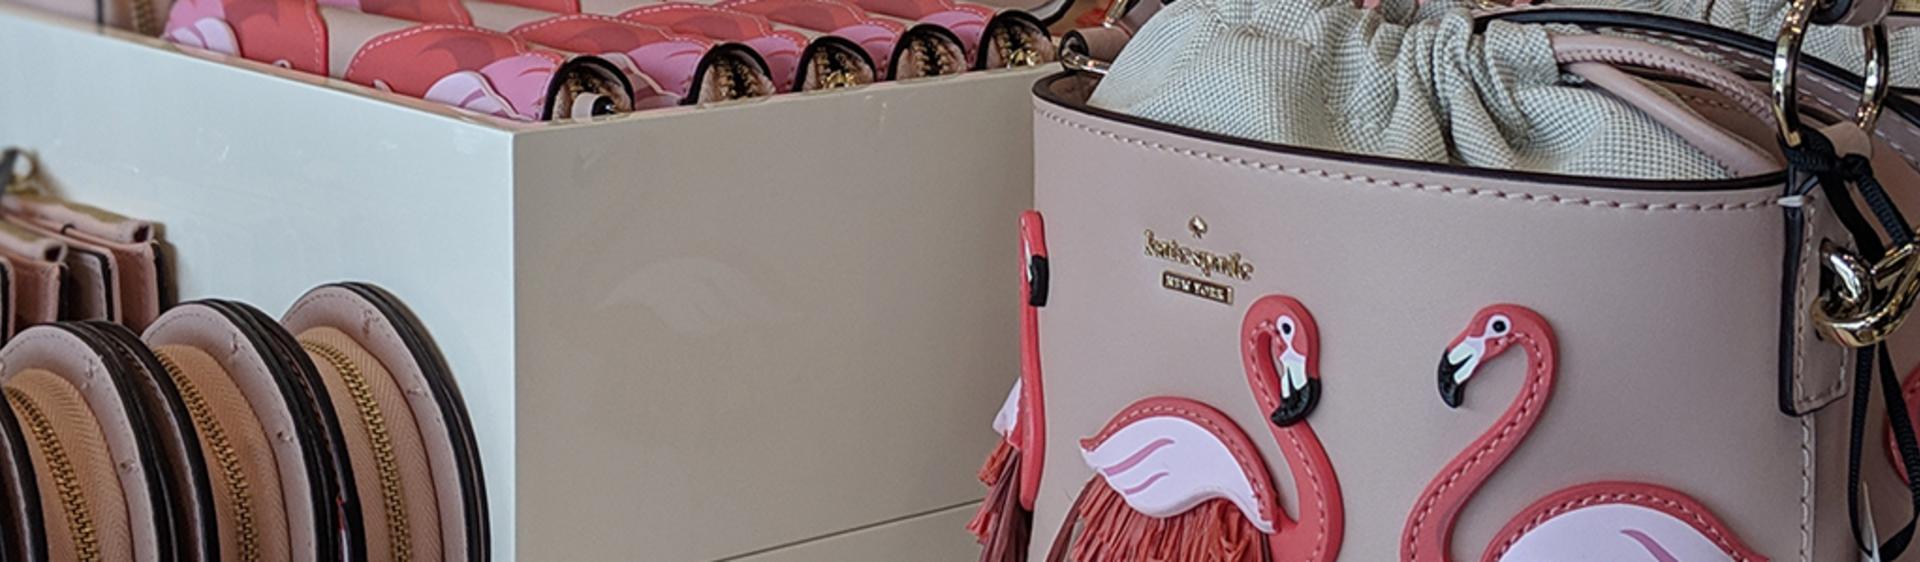 Kate Spade Outlet at Allen Premium Outlets in Texas